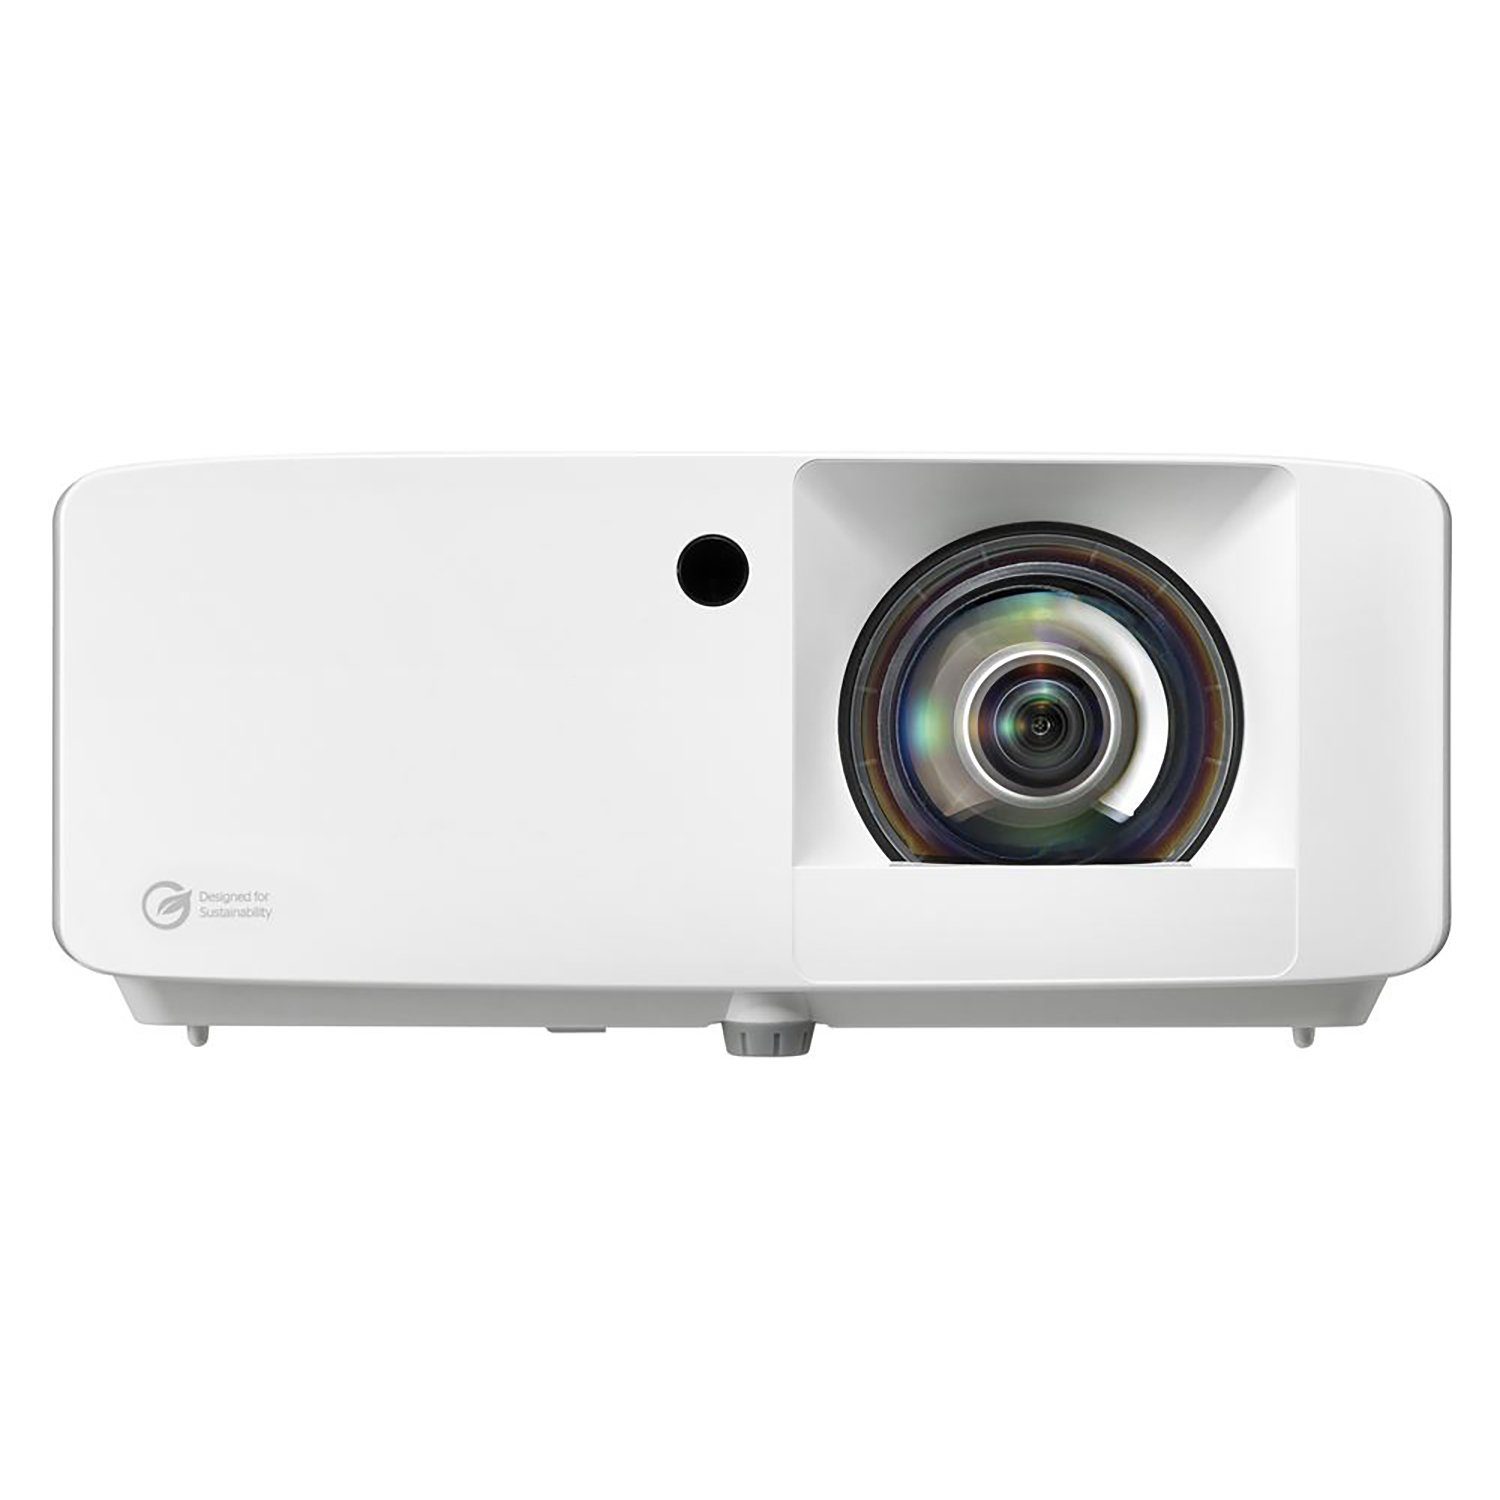 Optoma GT2100HDR 3D-Beamer (4200 px) 1920 1080 x lm, 2000000:1